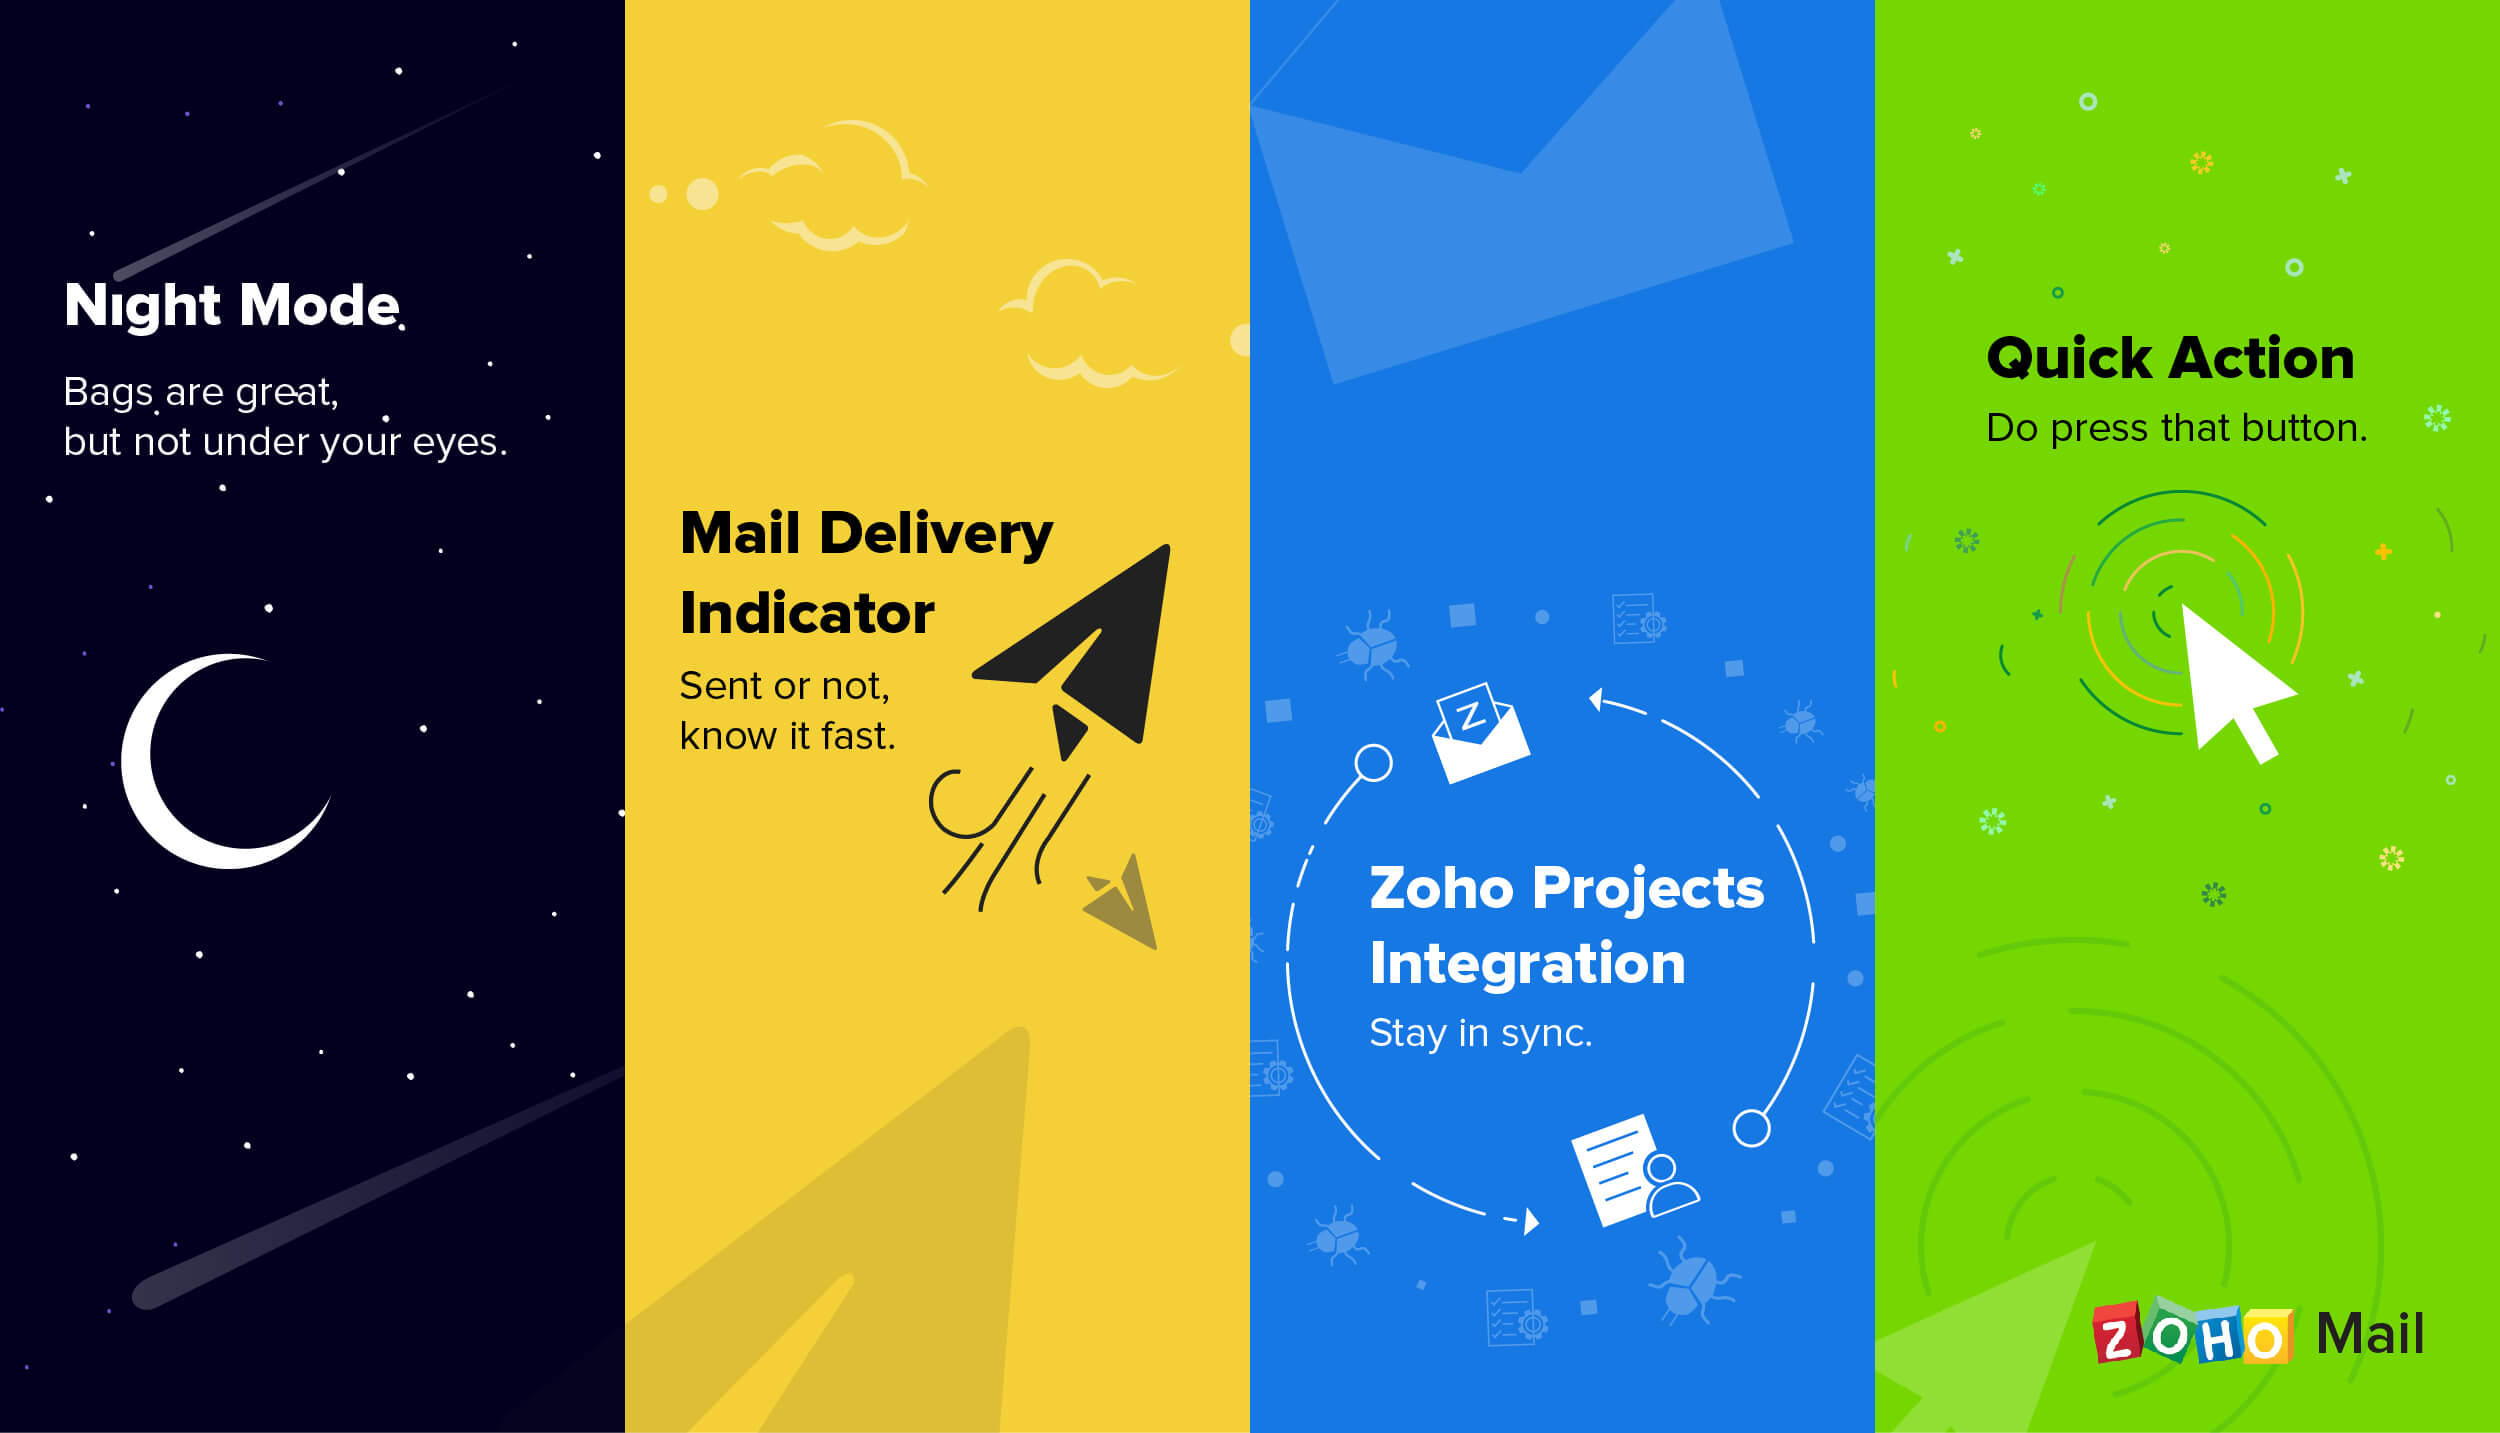 Announcing Night Mode, Quick Actions, and more in Zoho Mail